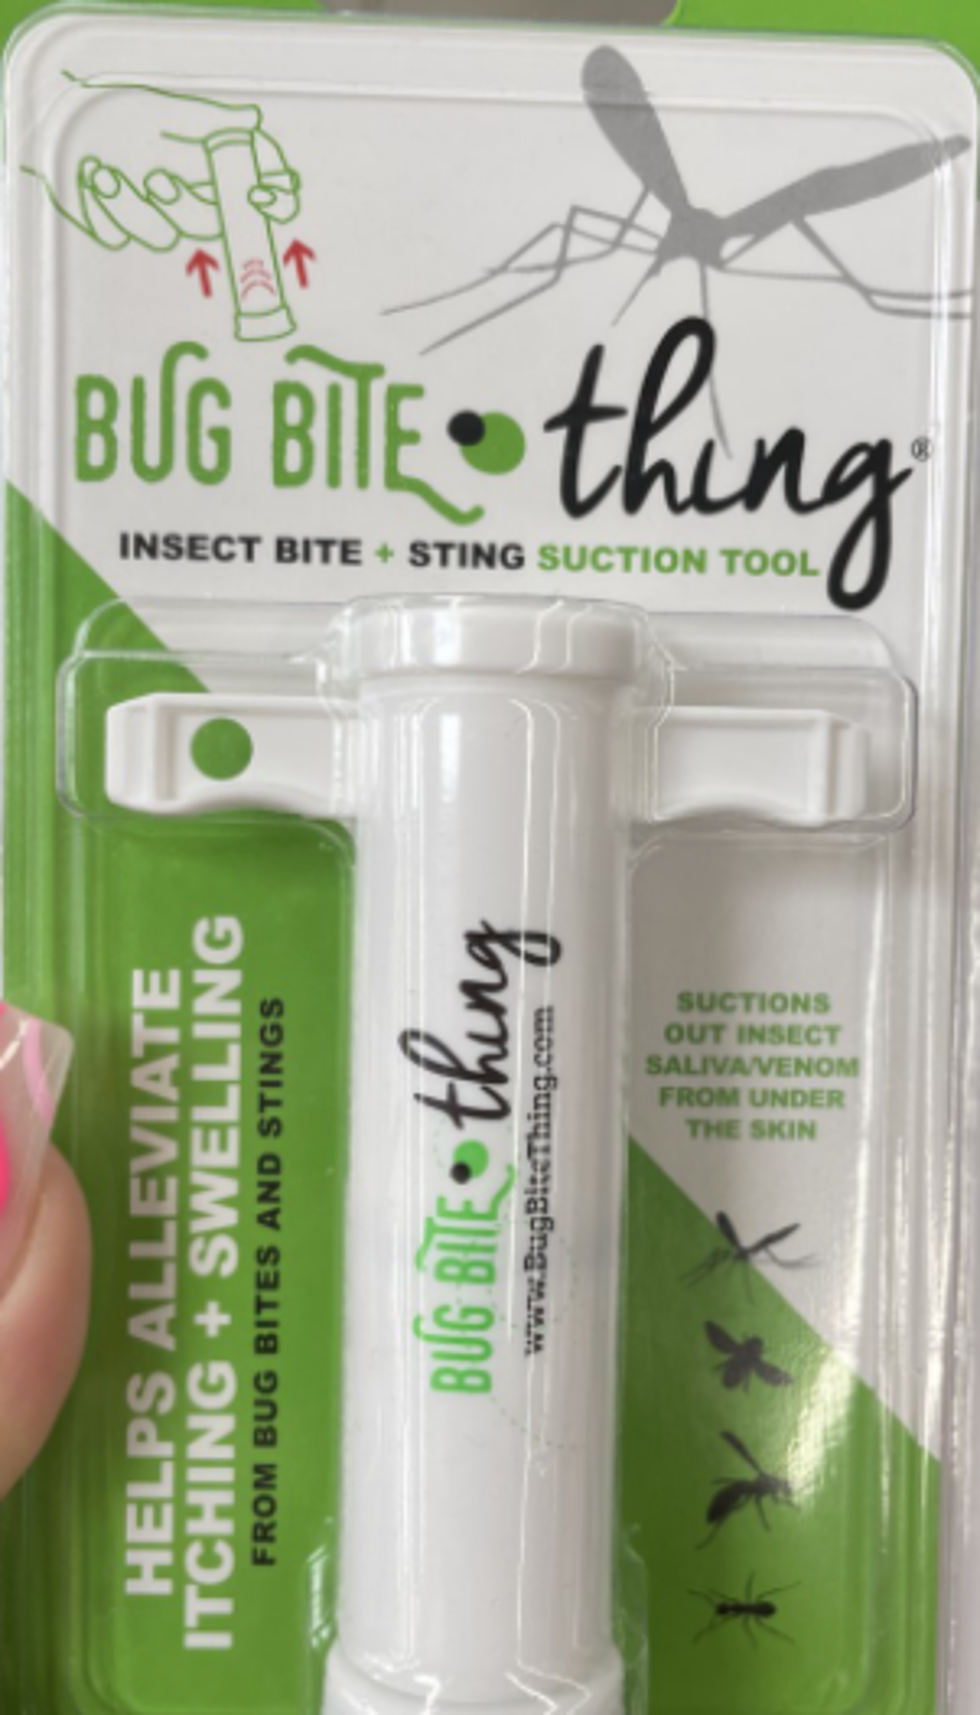 Does This Bug Bite thing Actually Work For Bug Bites?